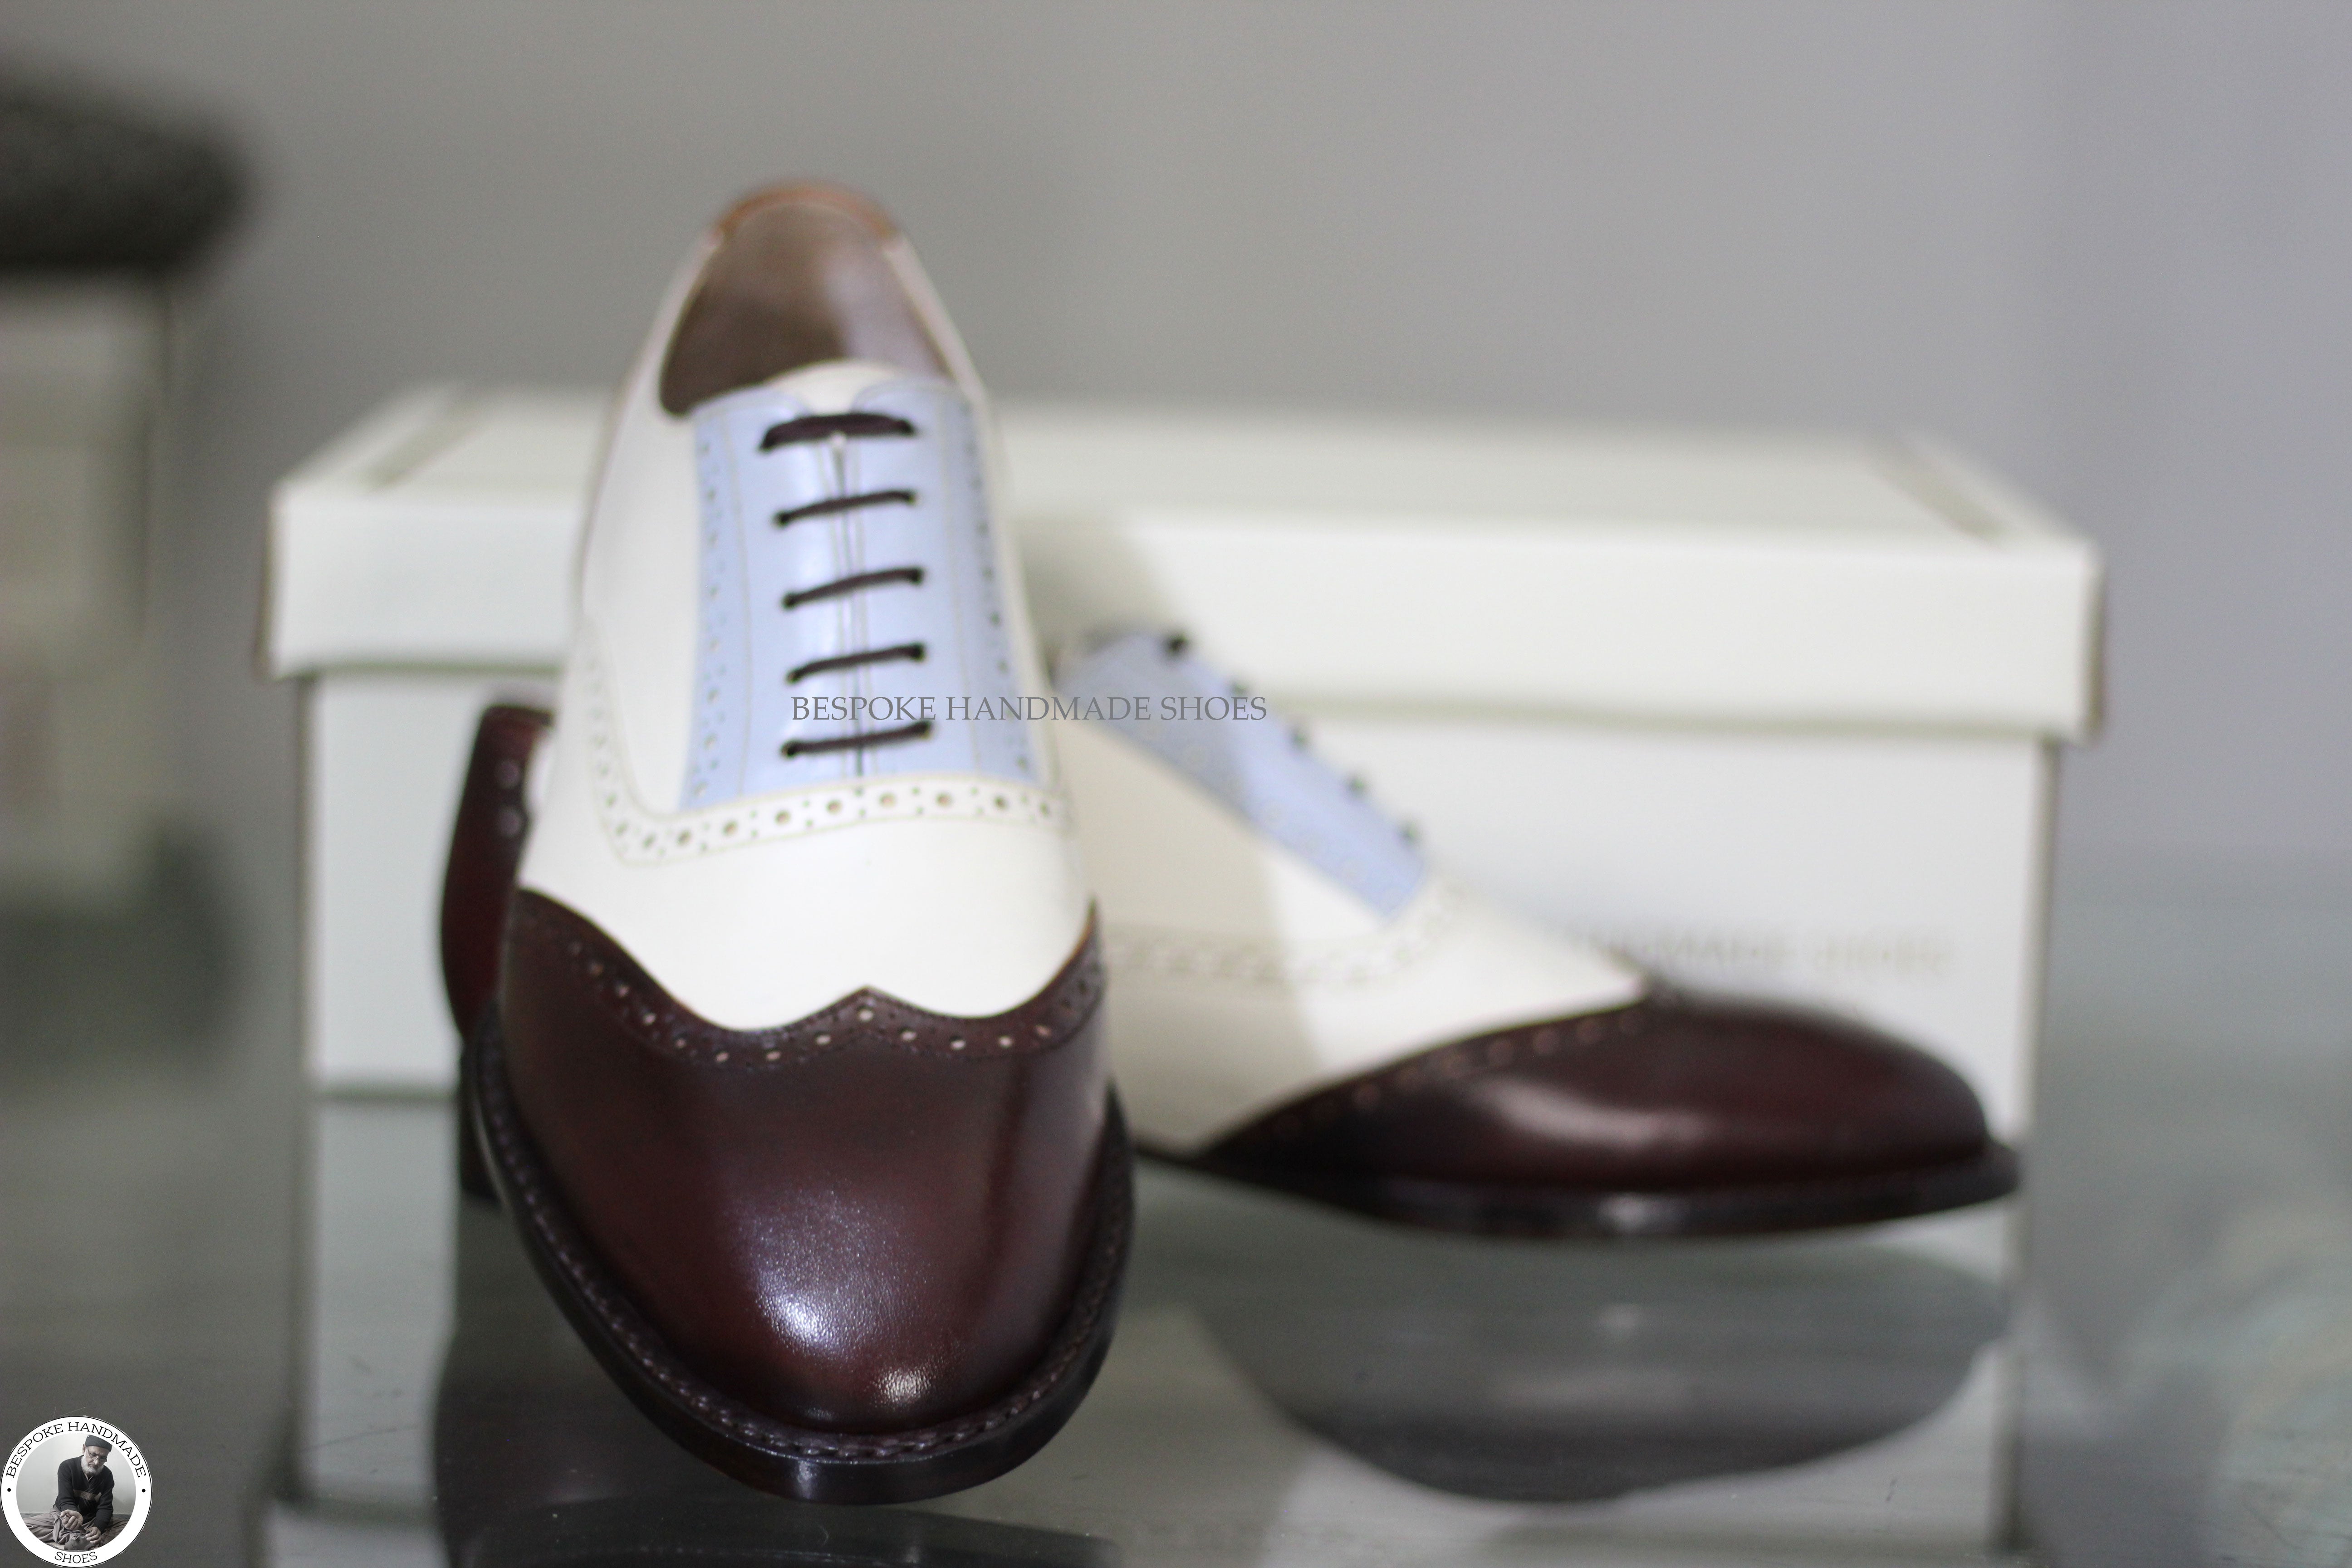 Wingtip Brogue Lace Up Oxford Shoes